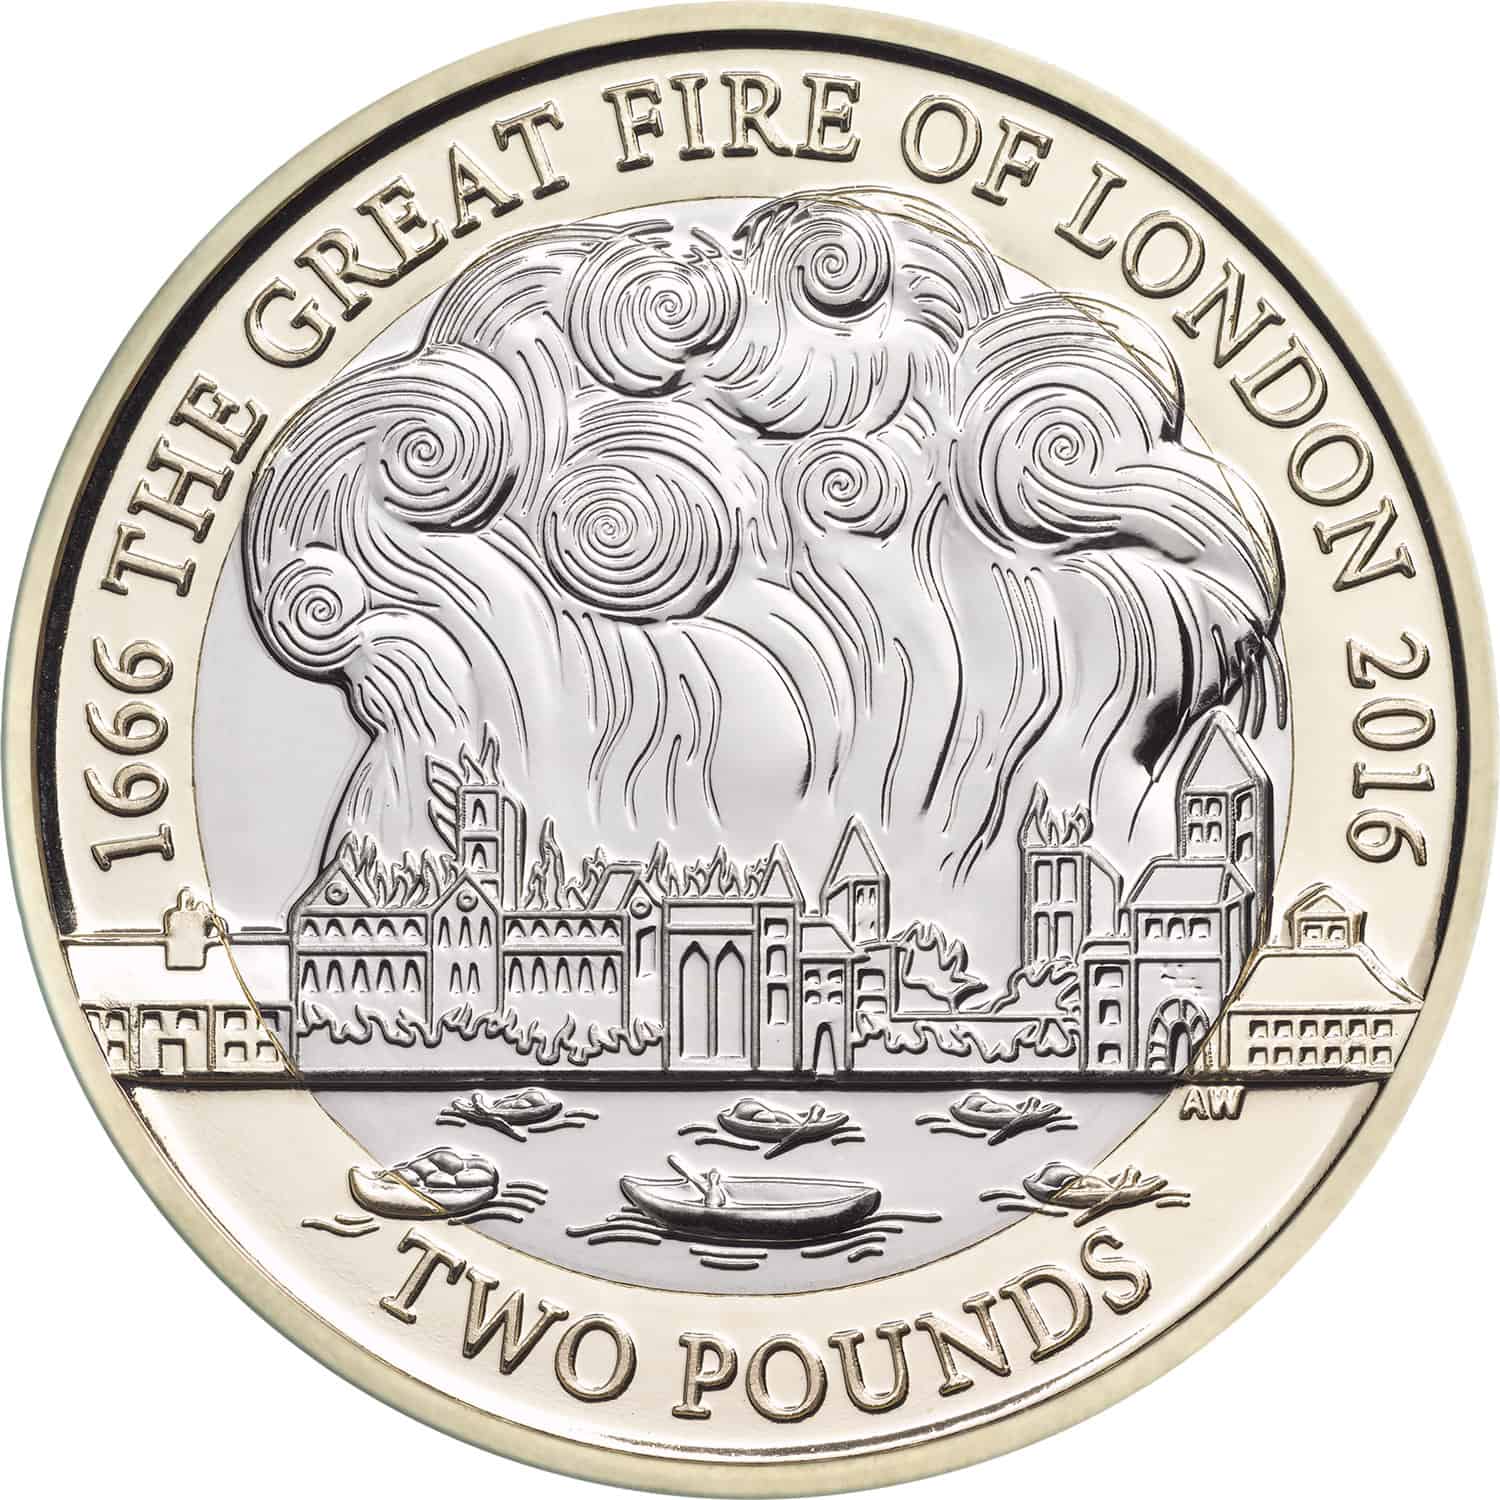 Albums/Collectors. Brand New THE GREAT FIRE OF LONDON 1666 Silver Commemorative 